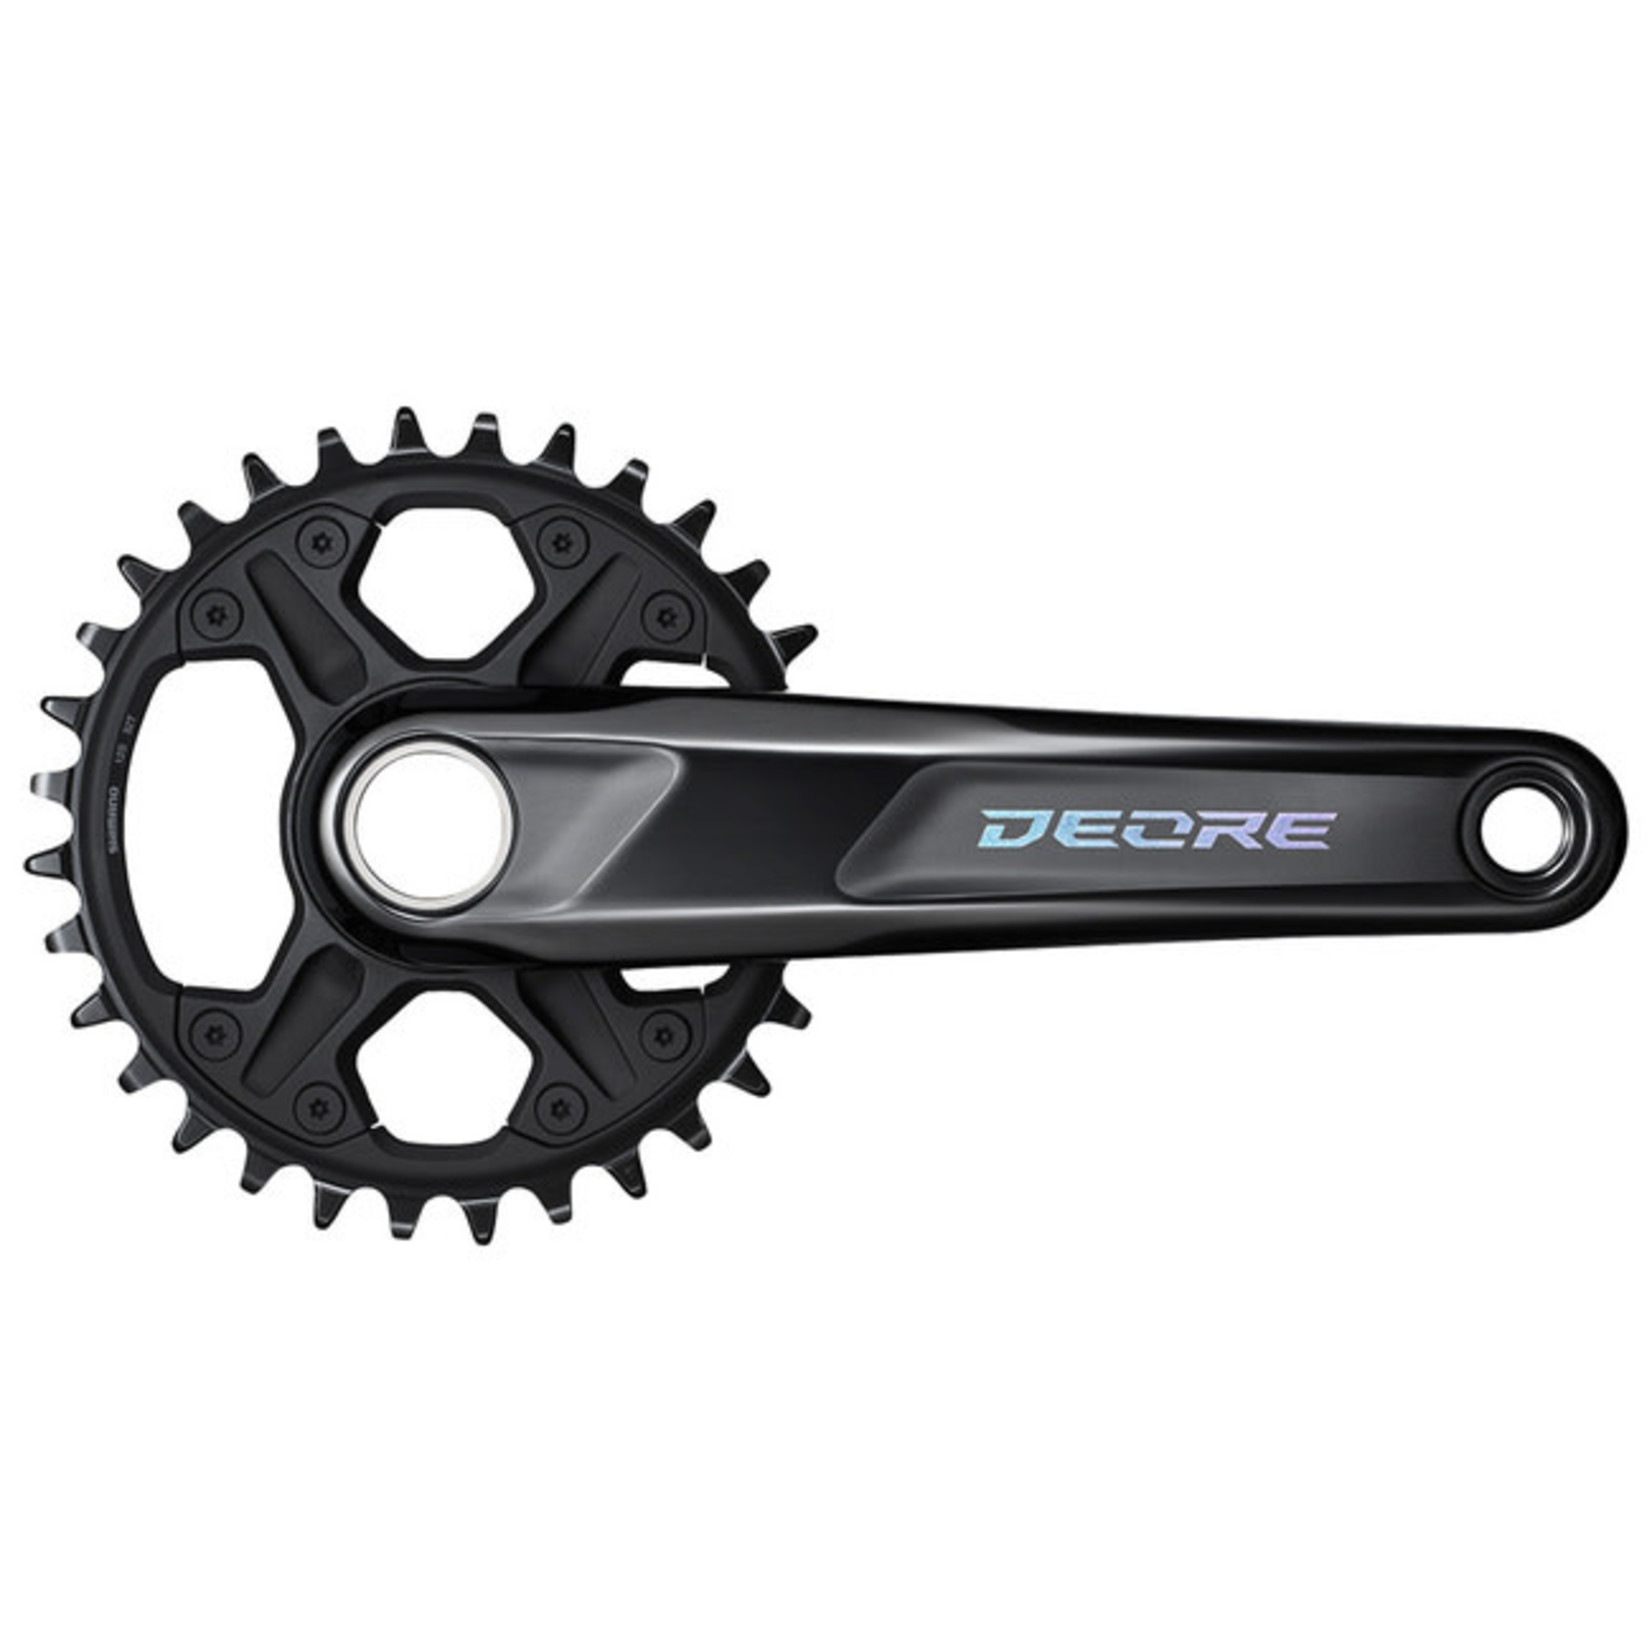 Shimano FRONT CHAINWHEEL, FC-M6130-1, DEORE, FOR REAR 12-SPEED, 2-PCS FC, 170MM, 32T W/O CG, W/O BB PARTS, FOR CHAIN LINE 56.5MM